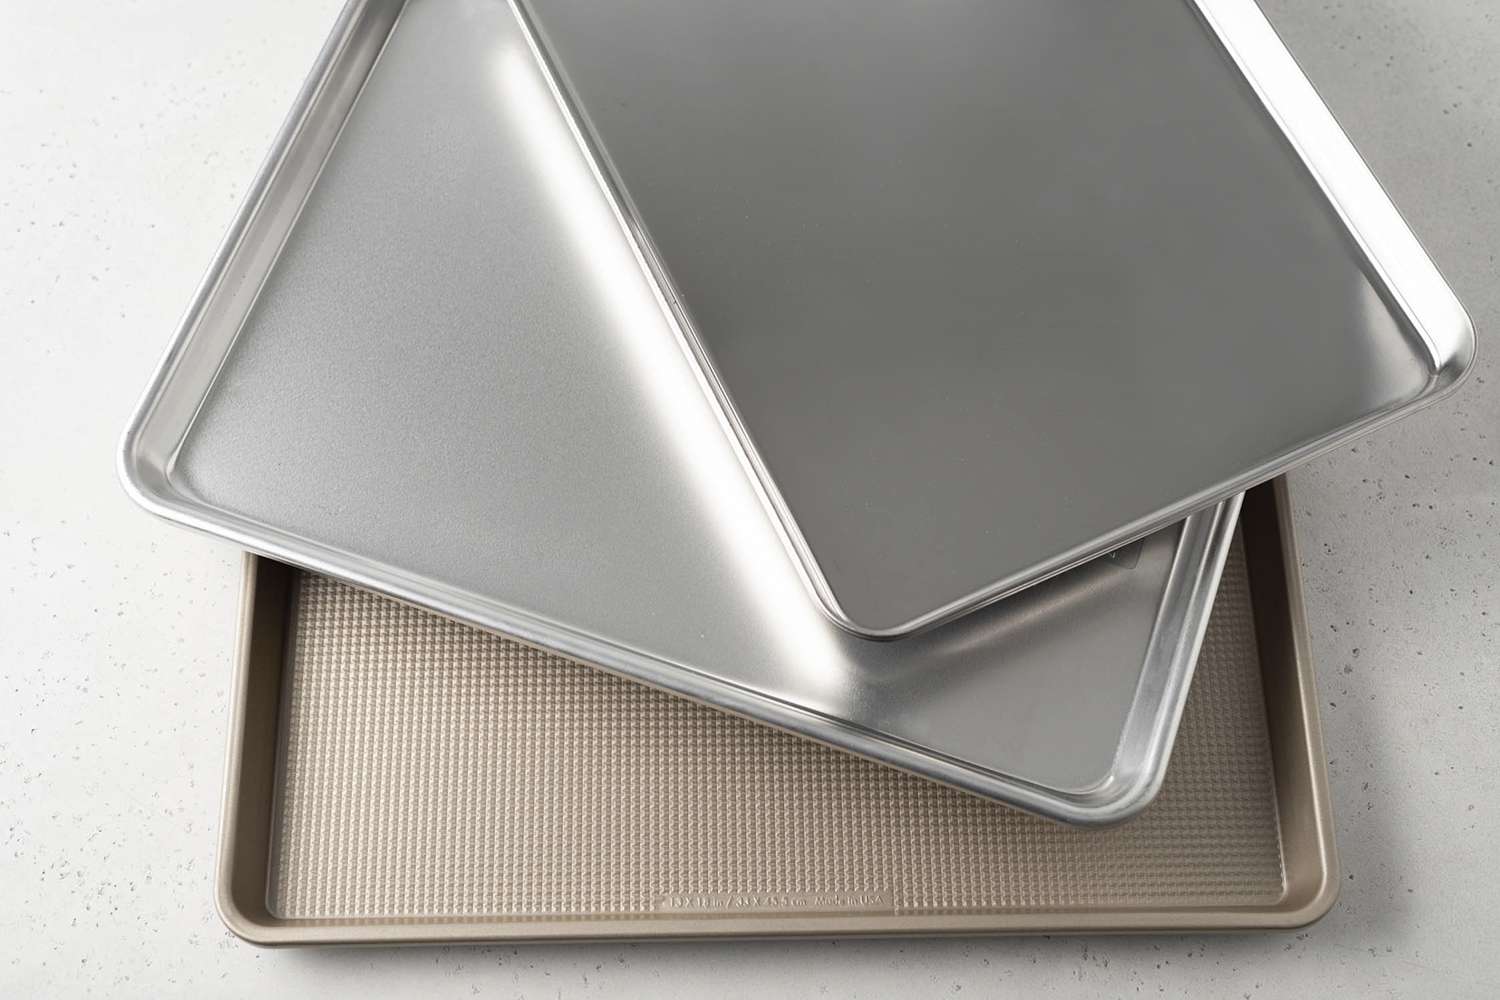 Assortment of baking sheets we recommend layered on top of each other displayed on a white surface